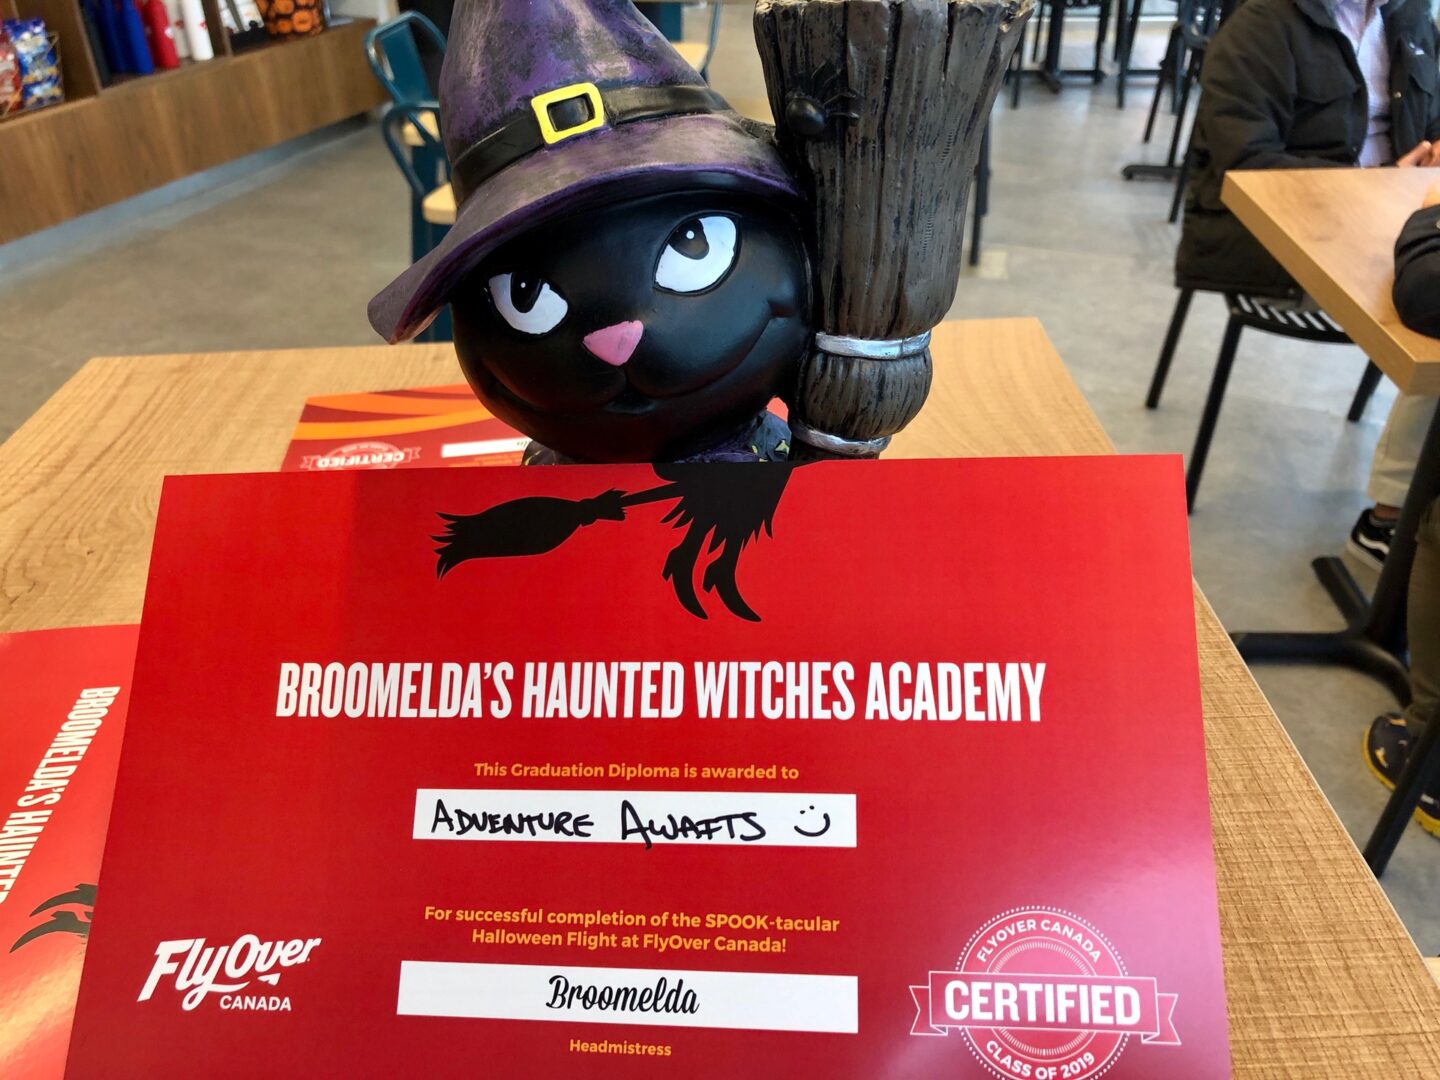 broomelda's haunted witches academy certificate that you get after your Flyover Canada Halloween ride